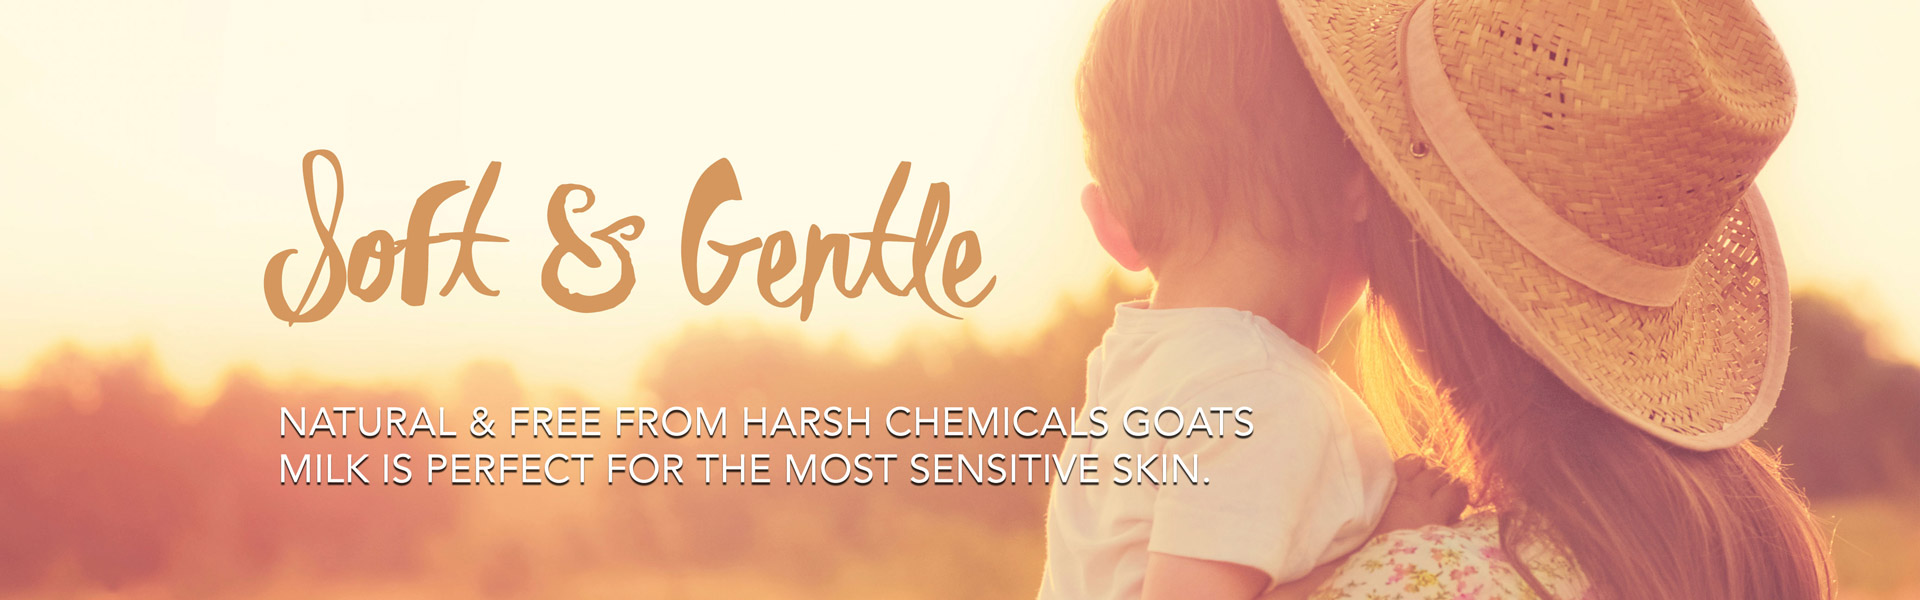 Soft And Gentle Skin Care